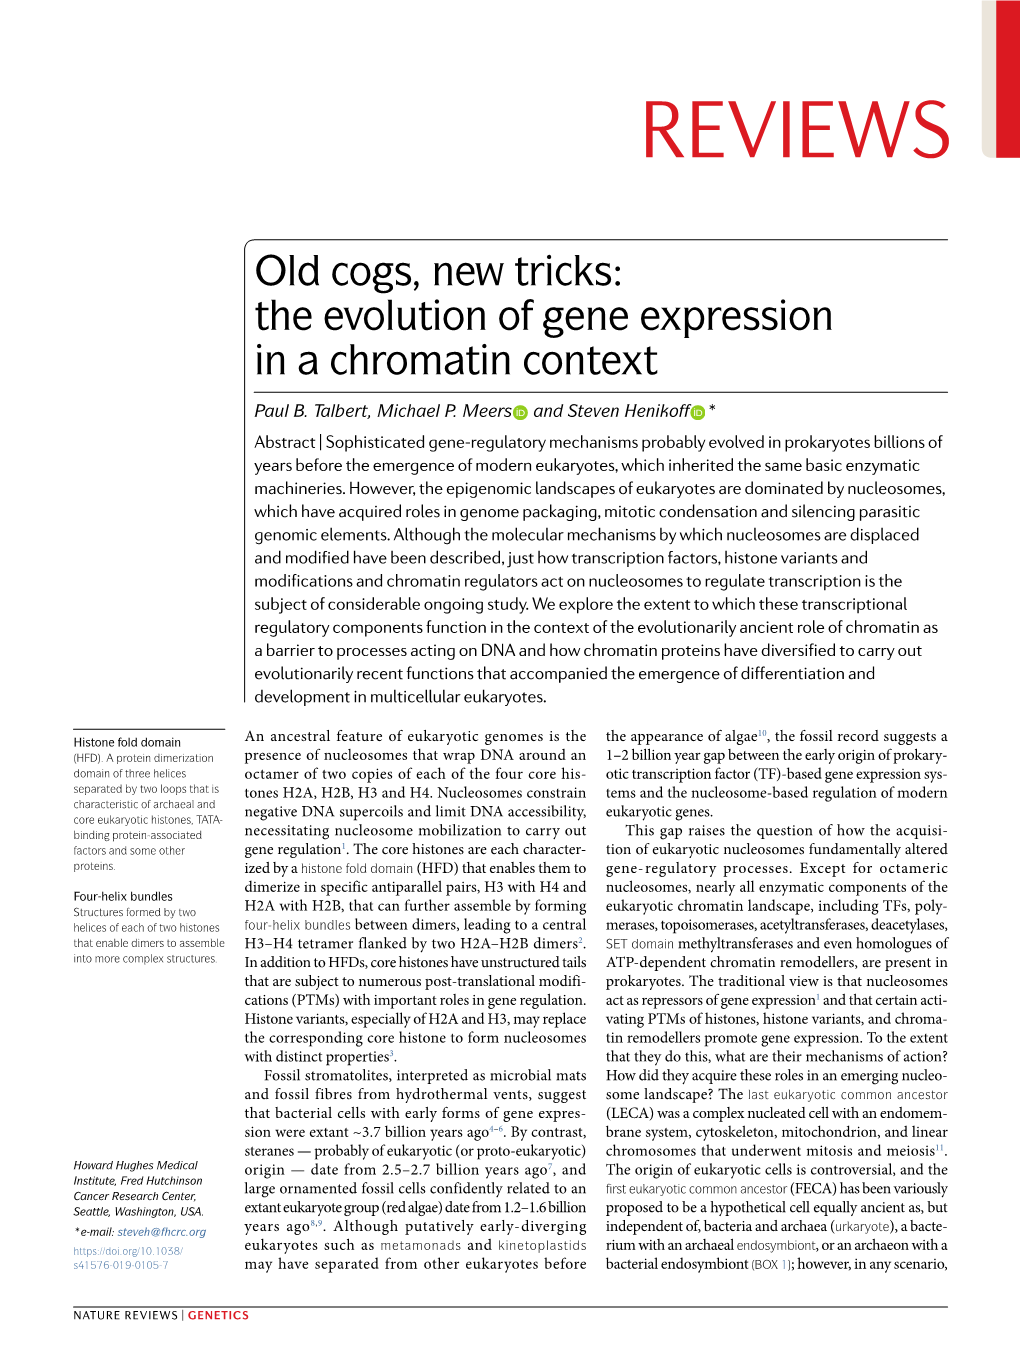 Old Cogs, New Tricks: the Evolution of Gene Expression in a Chromatin Context